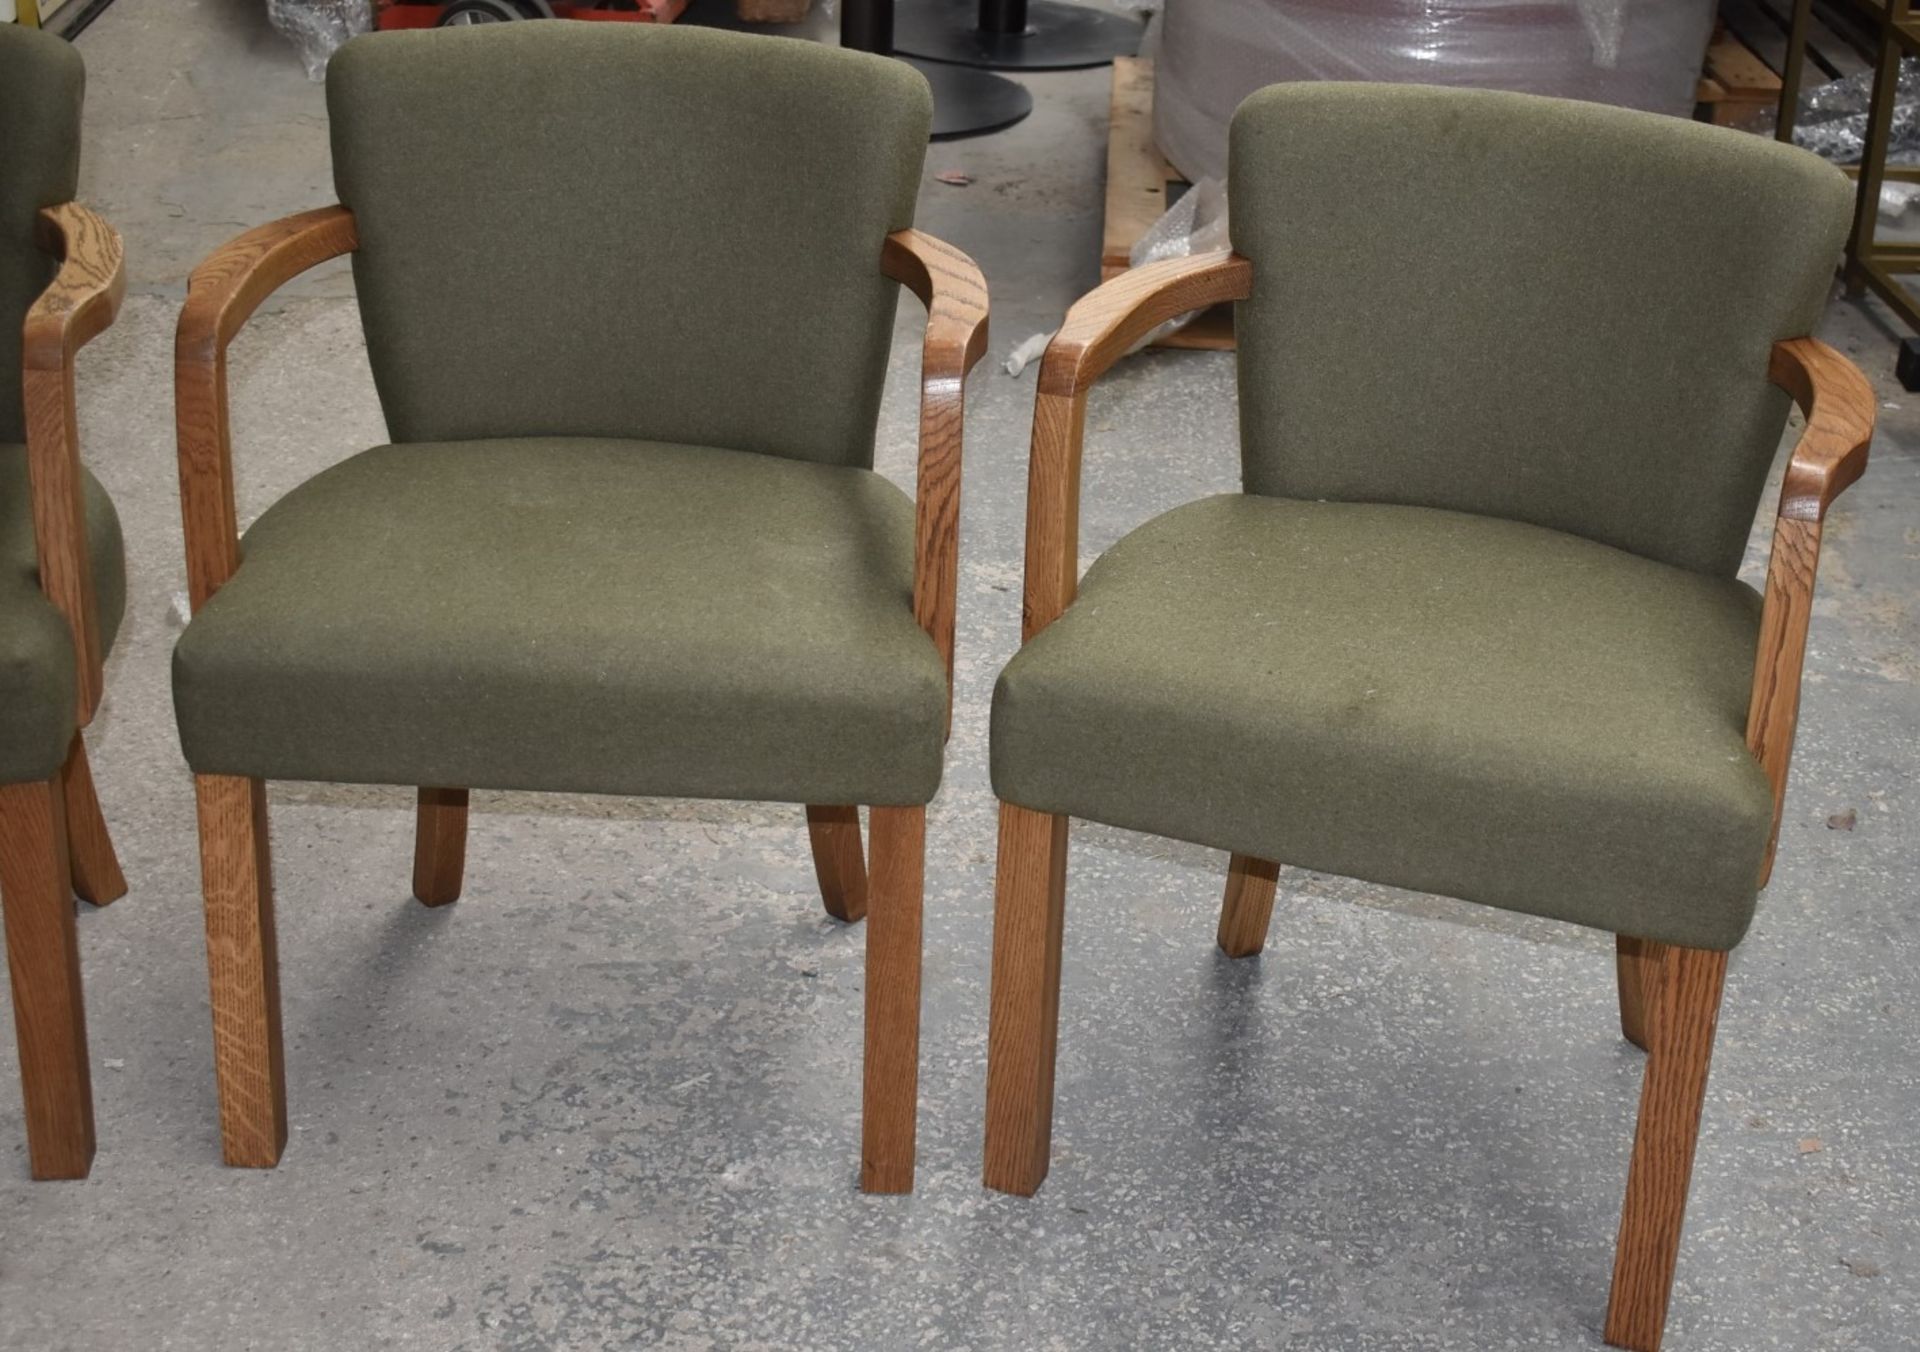 4 x Danish Style Occasional Arm Chairs With Curved Oak Arms and Vintage Green Upholstery - - Image 2 of 14